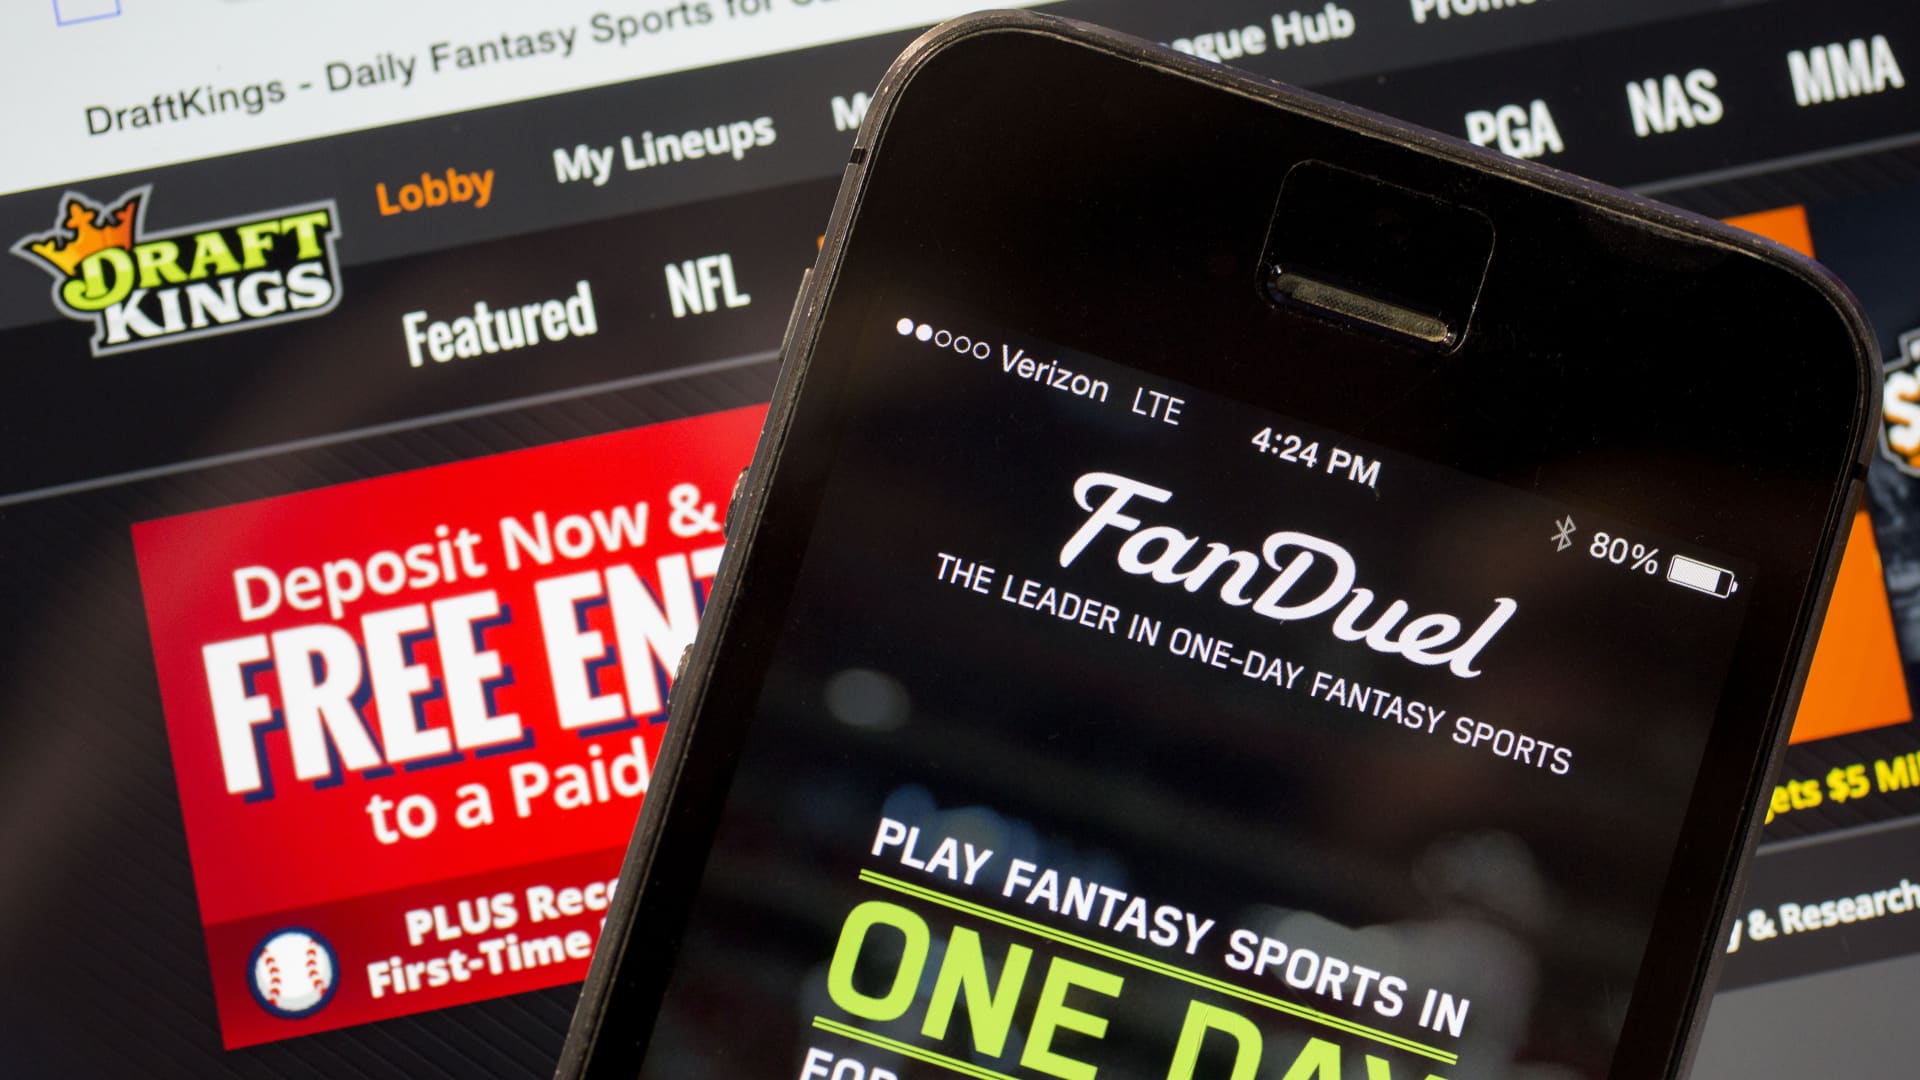 FanDuel parent Flutter stock falls after disappointing earnings